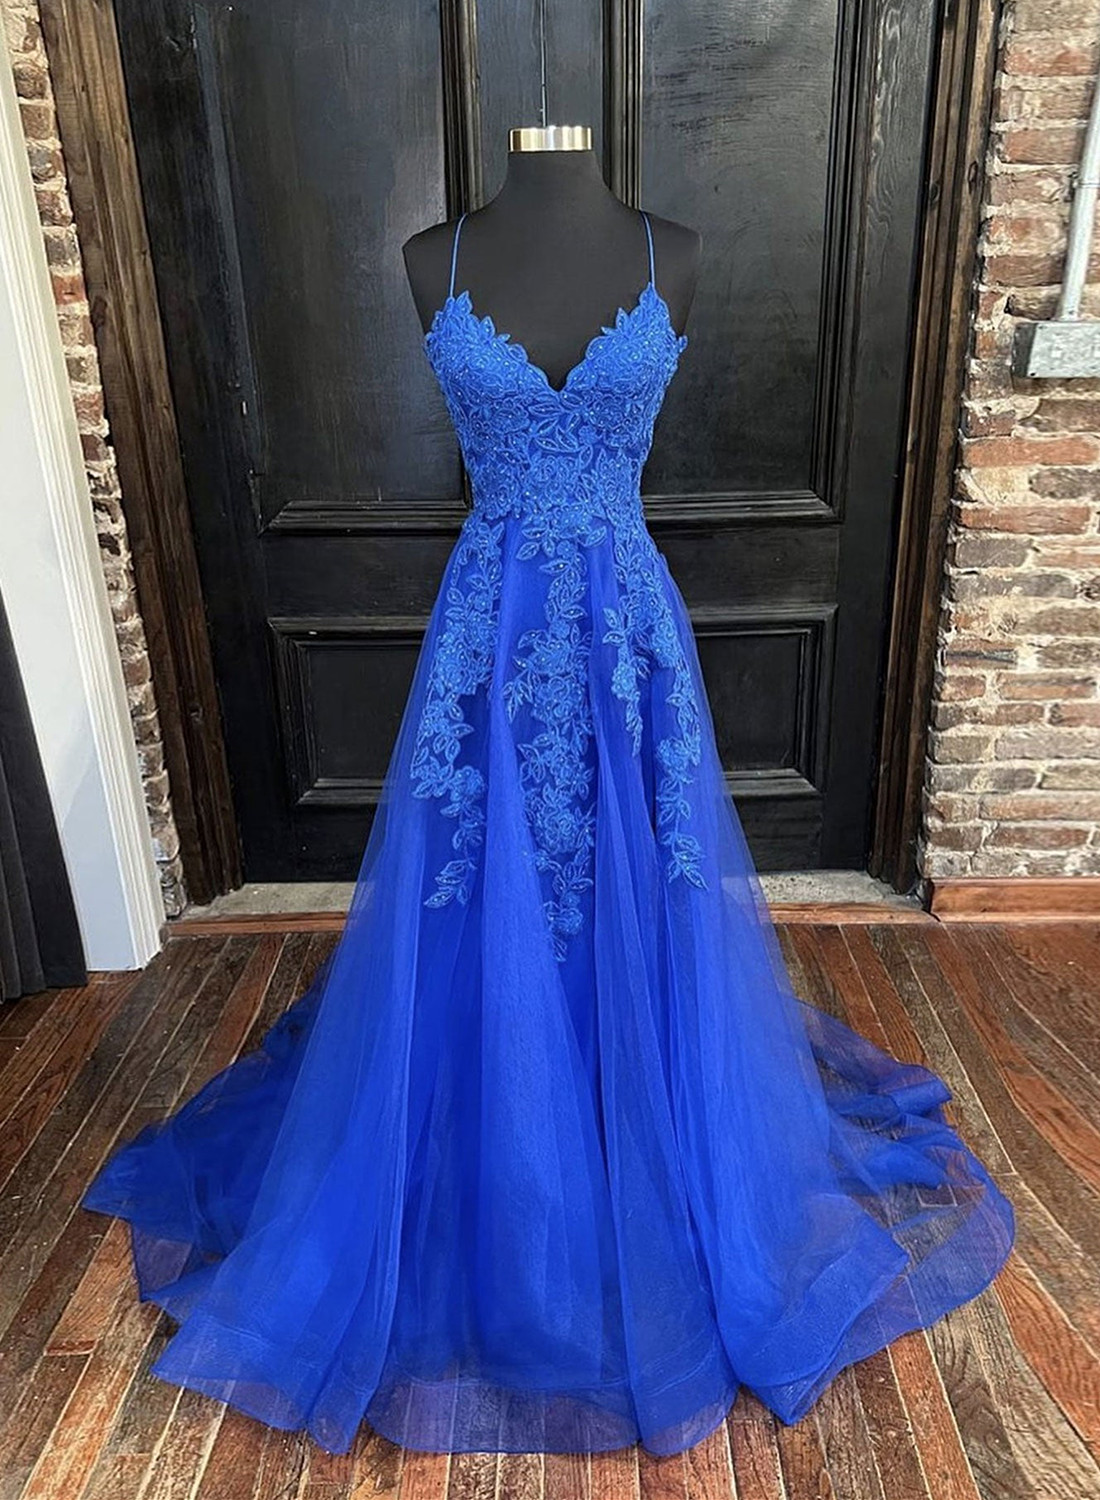 Blue Tulle With Lace V-neckline Floor Length Party Dress, A-line Blue Prom Dress